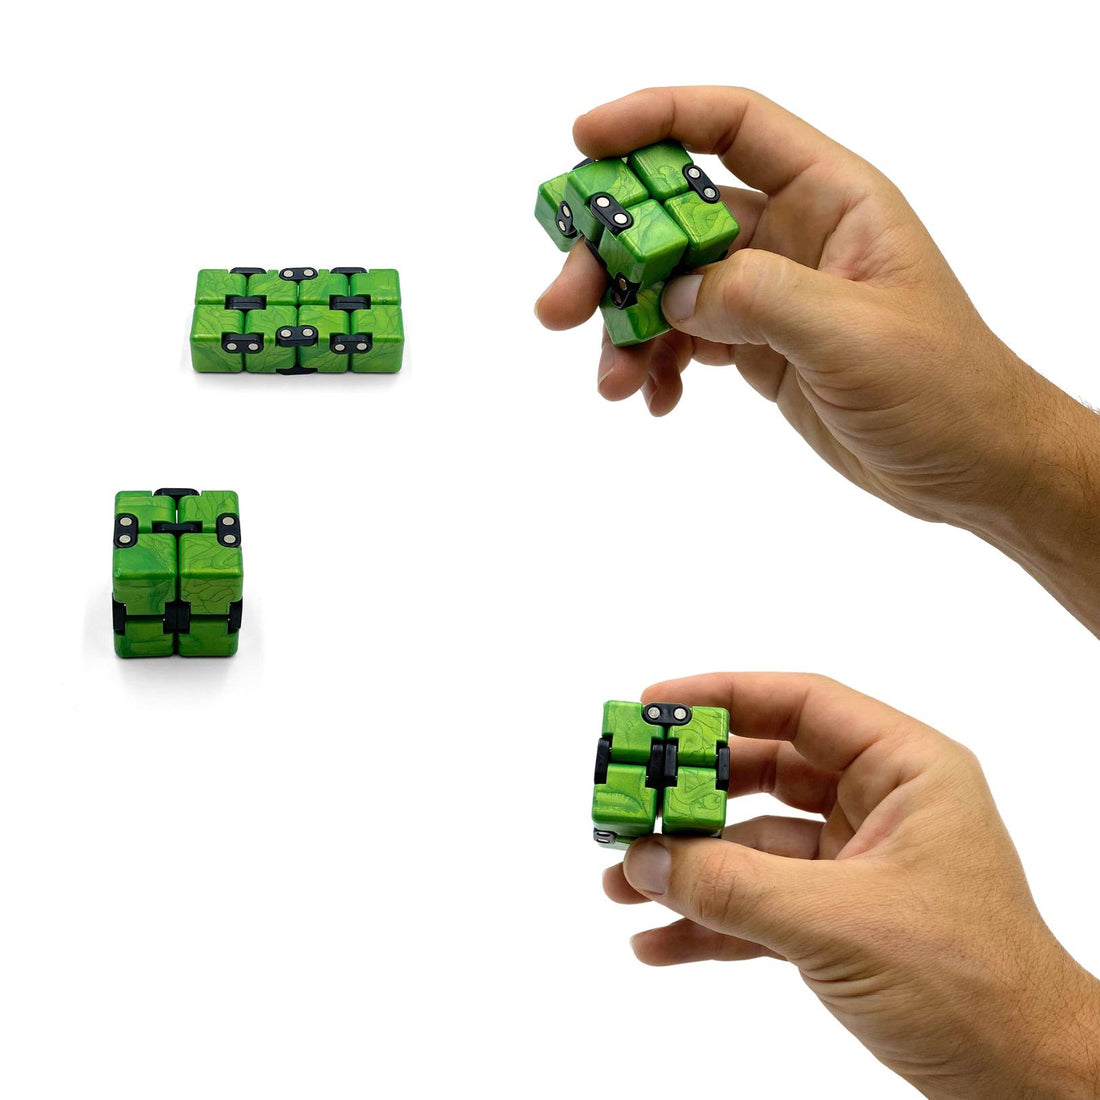 green infinite fidget cube closed, flat and in hands